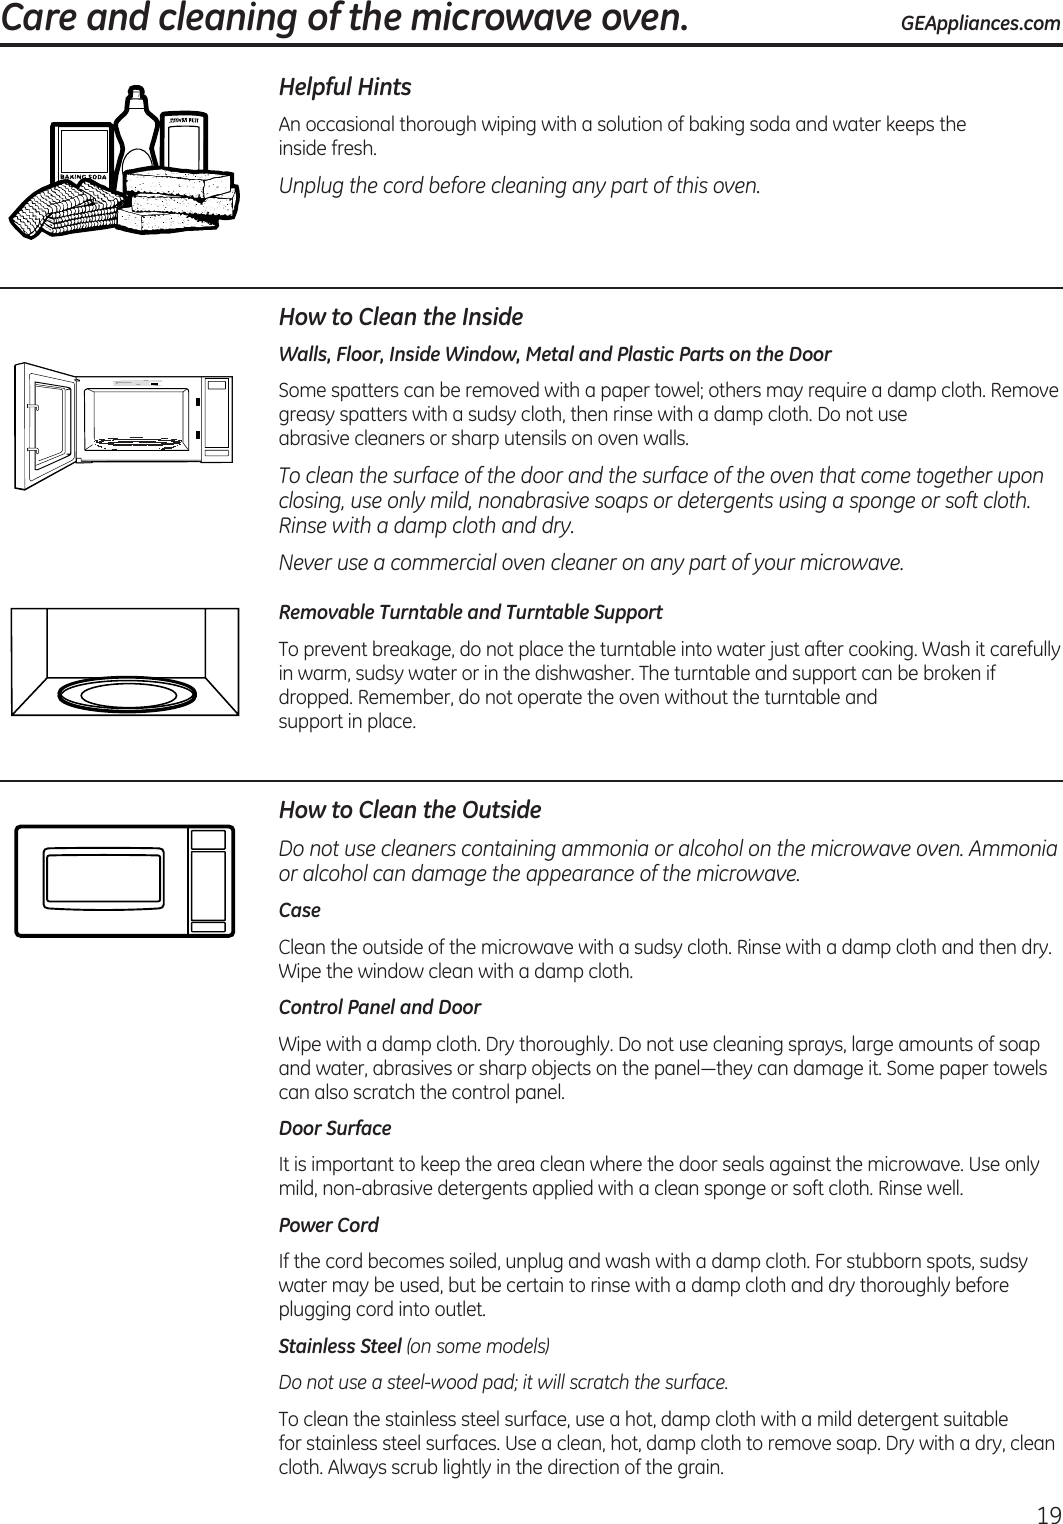  Care and cleaning of the microwave oven. GEAppliances.com19Helpful HintsAn  occasional thorough wiping with a solution of baking soda and water keeps the  inside fresh.Unplug the cord before cleaning any part of this oven.How to Clean the InsideWalls, Floor, Inside Window, Metal and Plastic Parts on the DoorSome spatters can be removed with a paper towel; others may require a damp cloth. Remove greasy spatters with a sudsy cloth, then rinse with a damp cloth. Do not use  abrasive cleaners or sharp utensils on oven walls. To clean the surface of the door and the surface of the oven that come together upon closing, use only mild, nonabrasive soaps or detergents using a sponge or soft cloth. Rinse with a damp cloth and dry.Never use a commercial oven cleaner on any part of your microwave.Removable Turntable and Turntable Support To prevent breakage, do not place the turntable into water just after cooking. Wash it carefully in warm, sudsy water or in the dishwasher. The turntable and support can be broken if dropped. Remember, do not operate the oven without the turntable and  support in place.How to Clean the OutsideDo not use cleaners containing ammonia or alcohol on the microwave oven. Ammonia or alcohol can damage the appearance of the microwave.CaseClean the outside of the microwave with a sudsy cloth. Rinse with a damp cloth and then dry. Wipe the window clean with a damp cloth. Control Panel and DoorWipe with a damp cloth. Dry thoroughly. Do not use cleaning sprays, large amounts of soap and water, abrasives or sharp objects on the panel—they can damage it. Some paper towels can also scratch the control panel.Door SurfaceIt is important to keep the area clean where the door seals against the microwave. Use only mild, non-abrasive detergents applied with a clean sponge or soft cloth. Rinse well.Power CordIf the cord becomes soiled, unplug and wash with a damp cloth. For stubborn spots, sudsy water may be used, but be certain to rinse with a damp cloth and dry thoroughly before plugging cord into outlet.Stainless Steel (on some models)Do not use a steel-wood pad; it will scratch the surface.To clean the stainless steel surface, use a hot, damp cloth with a mild detergent suitable  for stainless steel surfaces. Use a clean, hot, damp cloth to remove soap. Dry with a dry, clean cloth. Always scrub lightly in the direction of the grain.